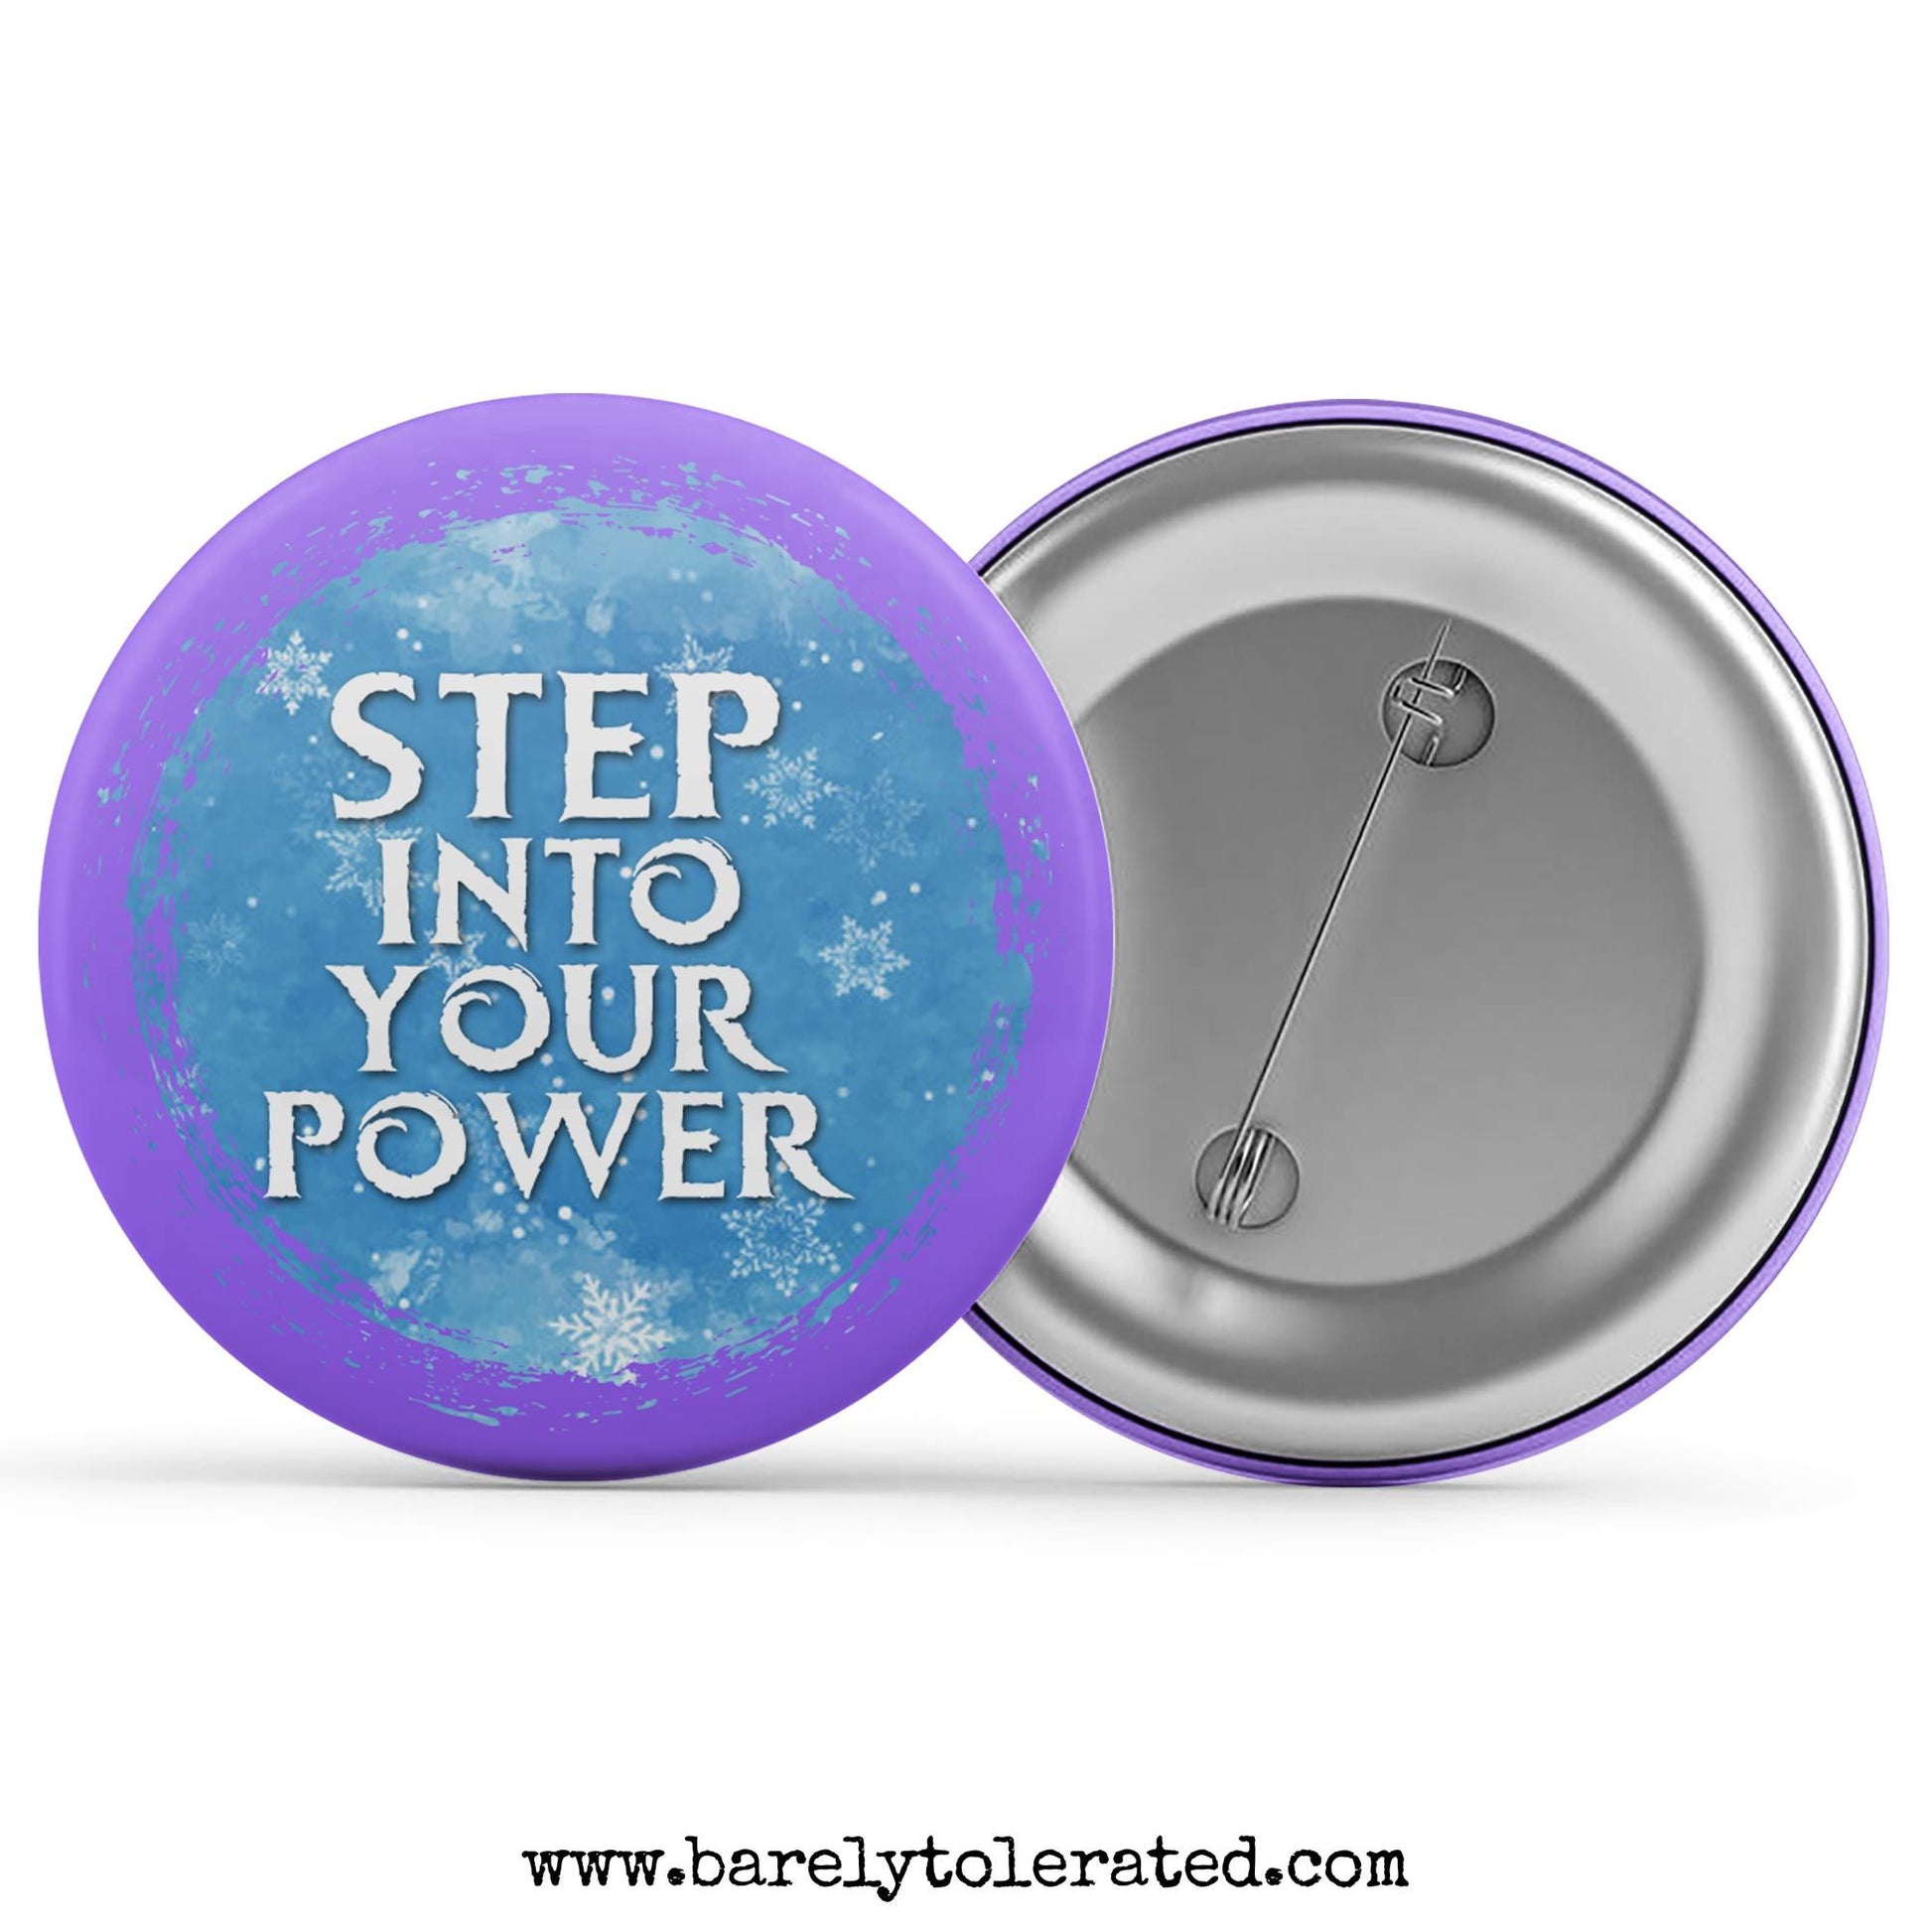 Step into your power Image